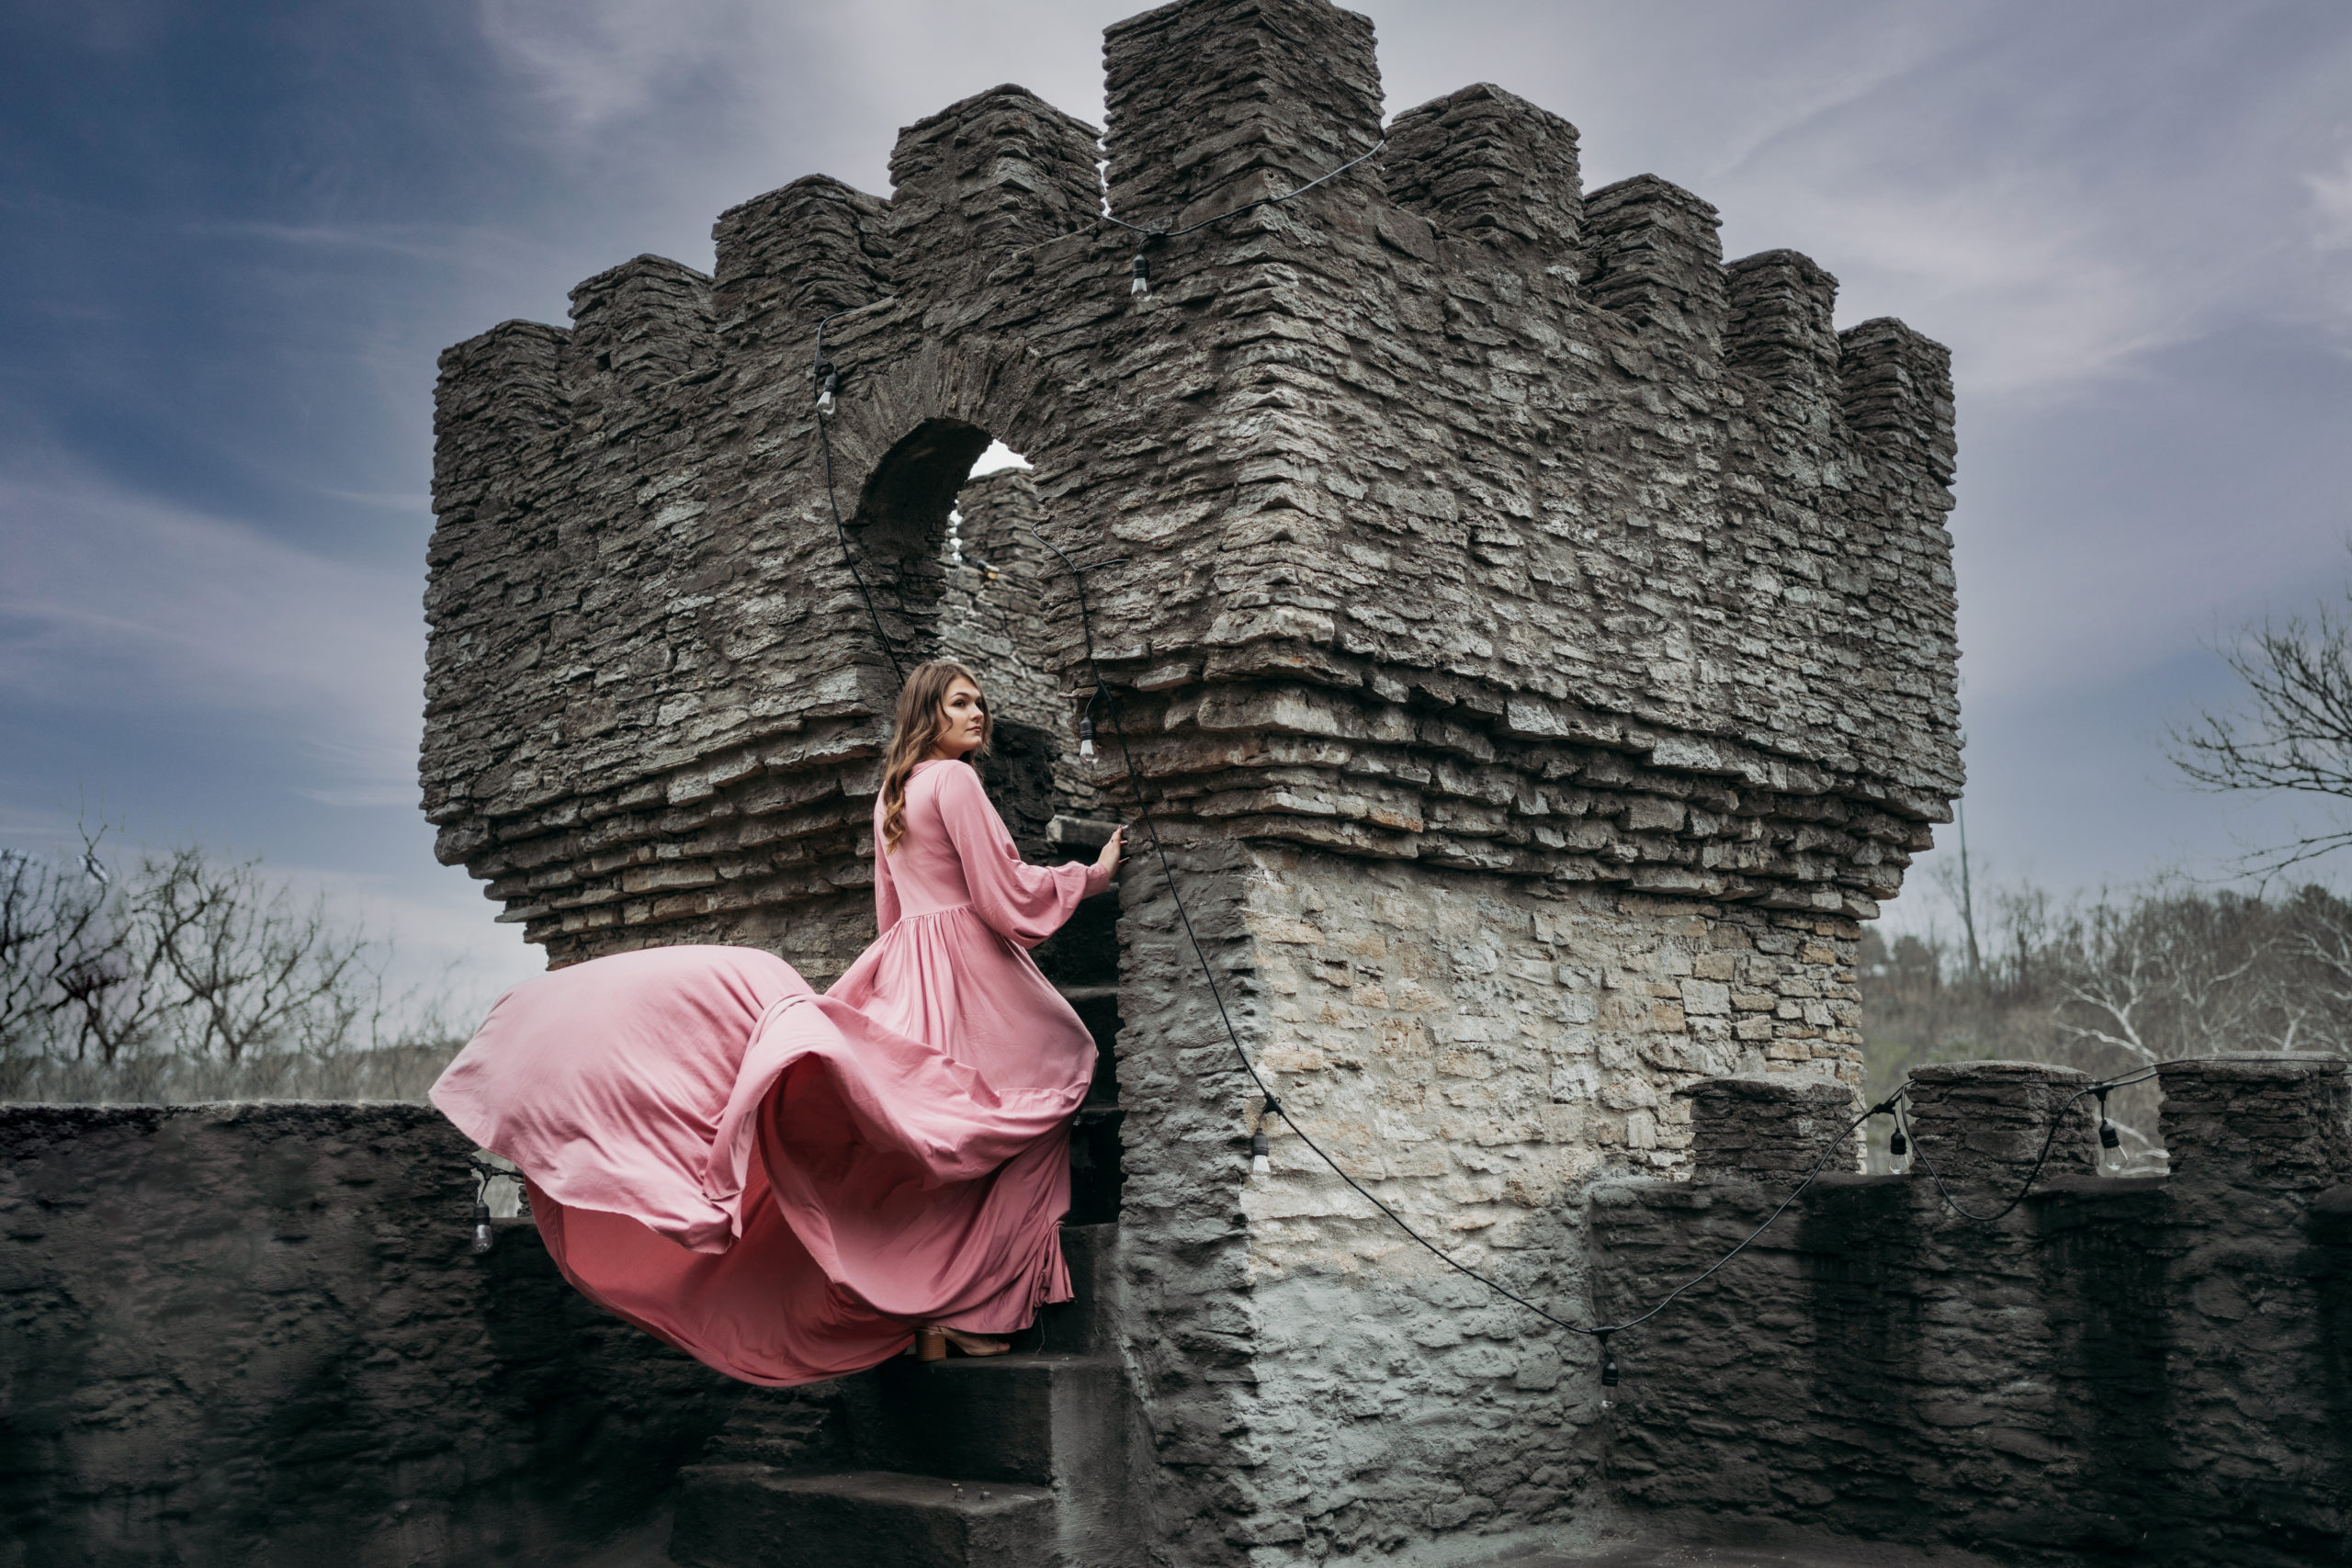 Loveland Castle Senior Session. Flowy dusty rose gown in the gardens. Standing in stone doorway at the tower